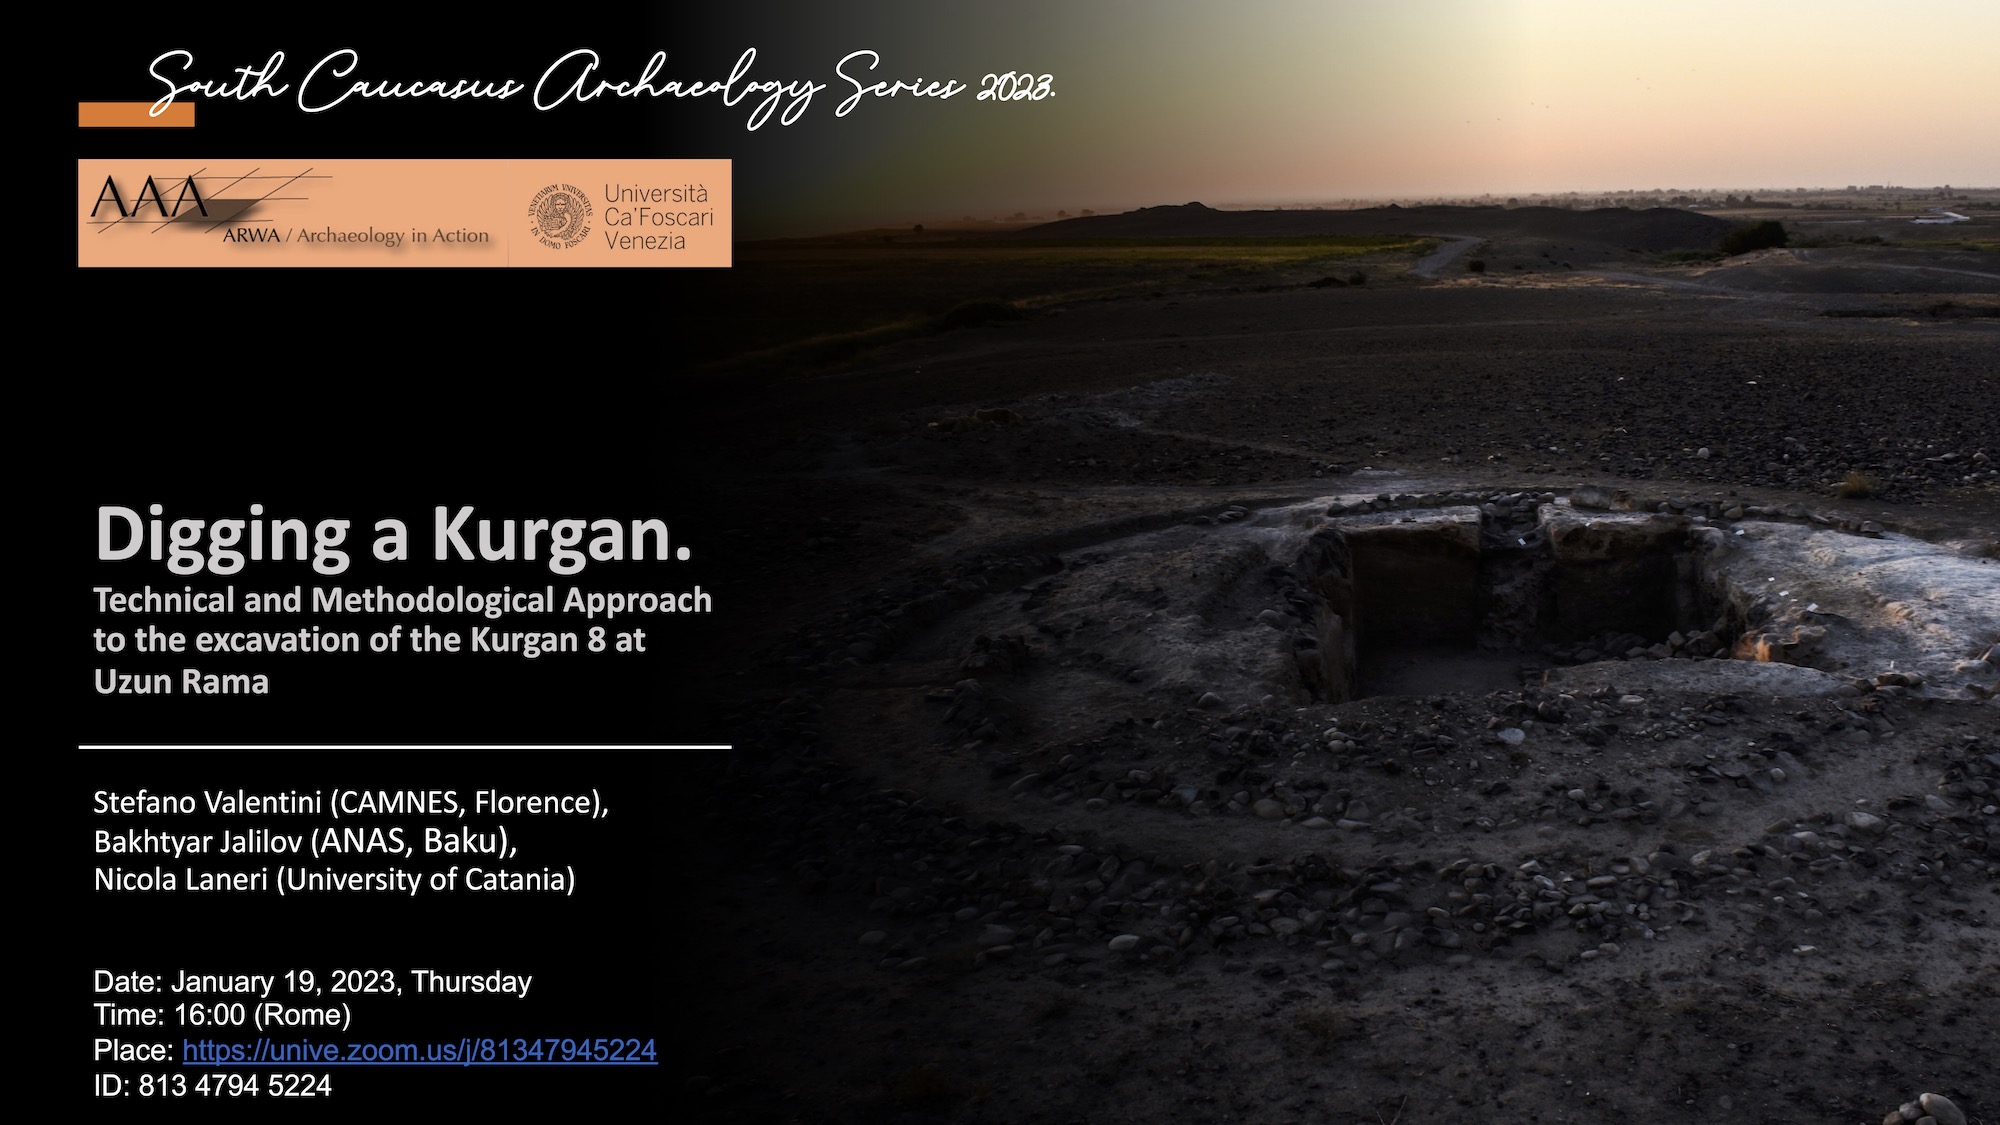 ON-LINE LECTURE: "Digging a Kurgan" (Stefano Valentini)